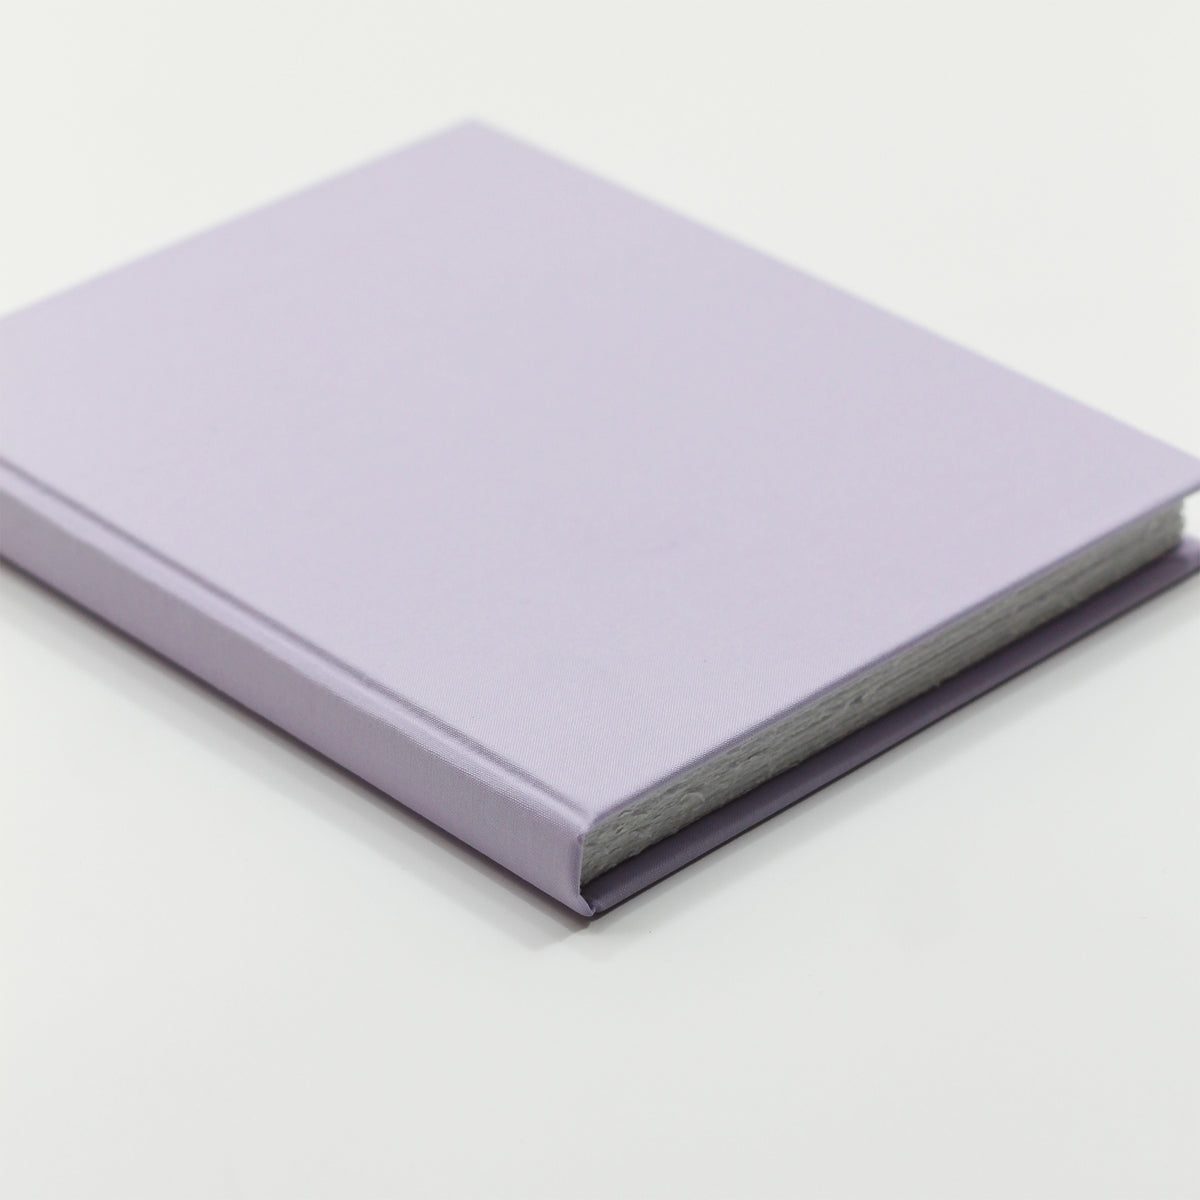 Large Blank Page Journal with Lavender Cotton Cover